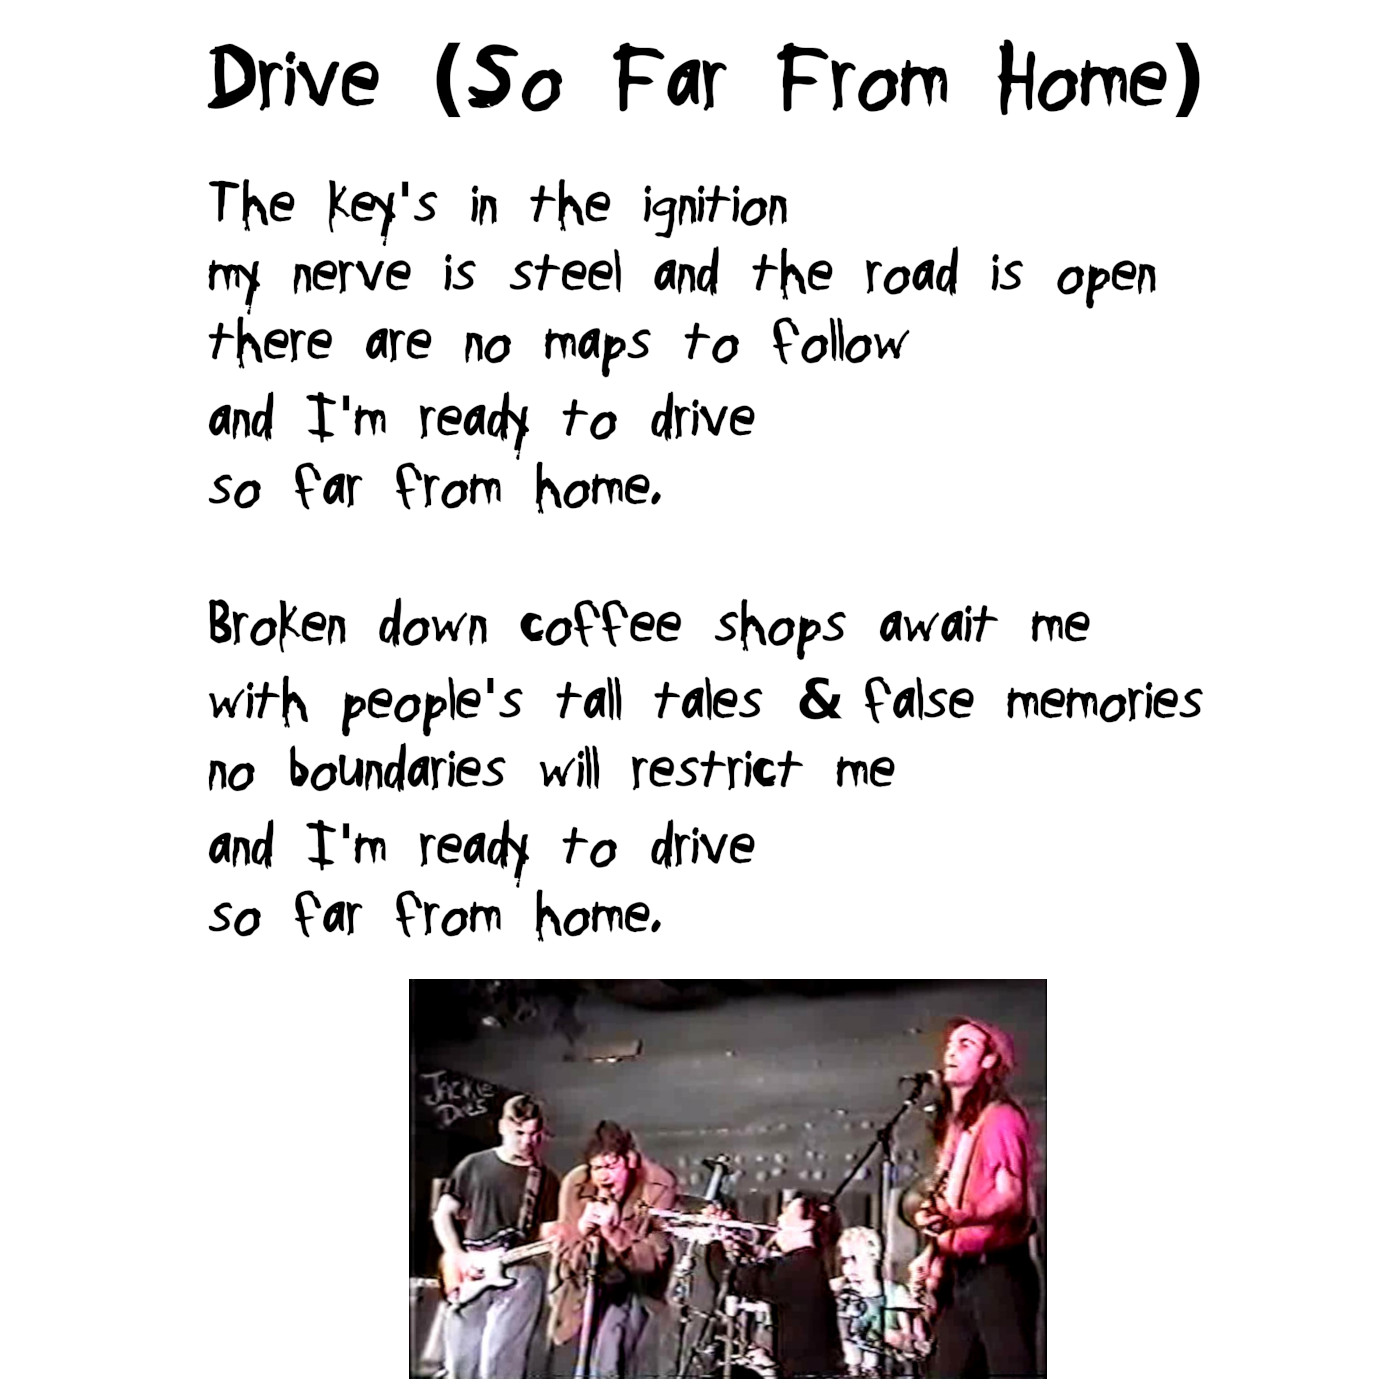 "Drive So Far From Home" image for the Hated Uncles Live at Gown 'n Gavel 07-22-1998 audio video.